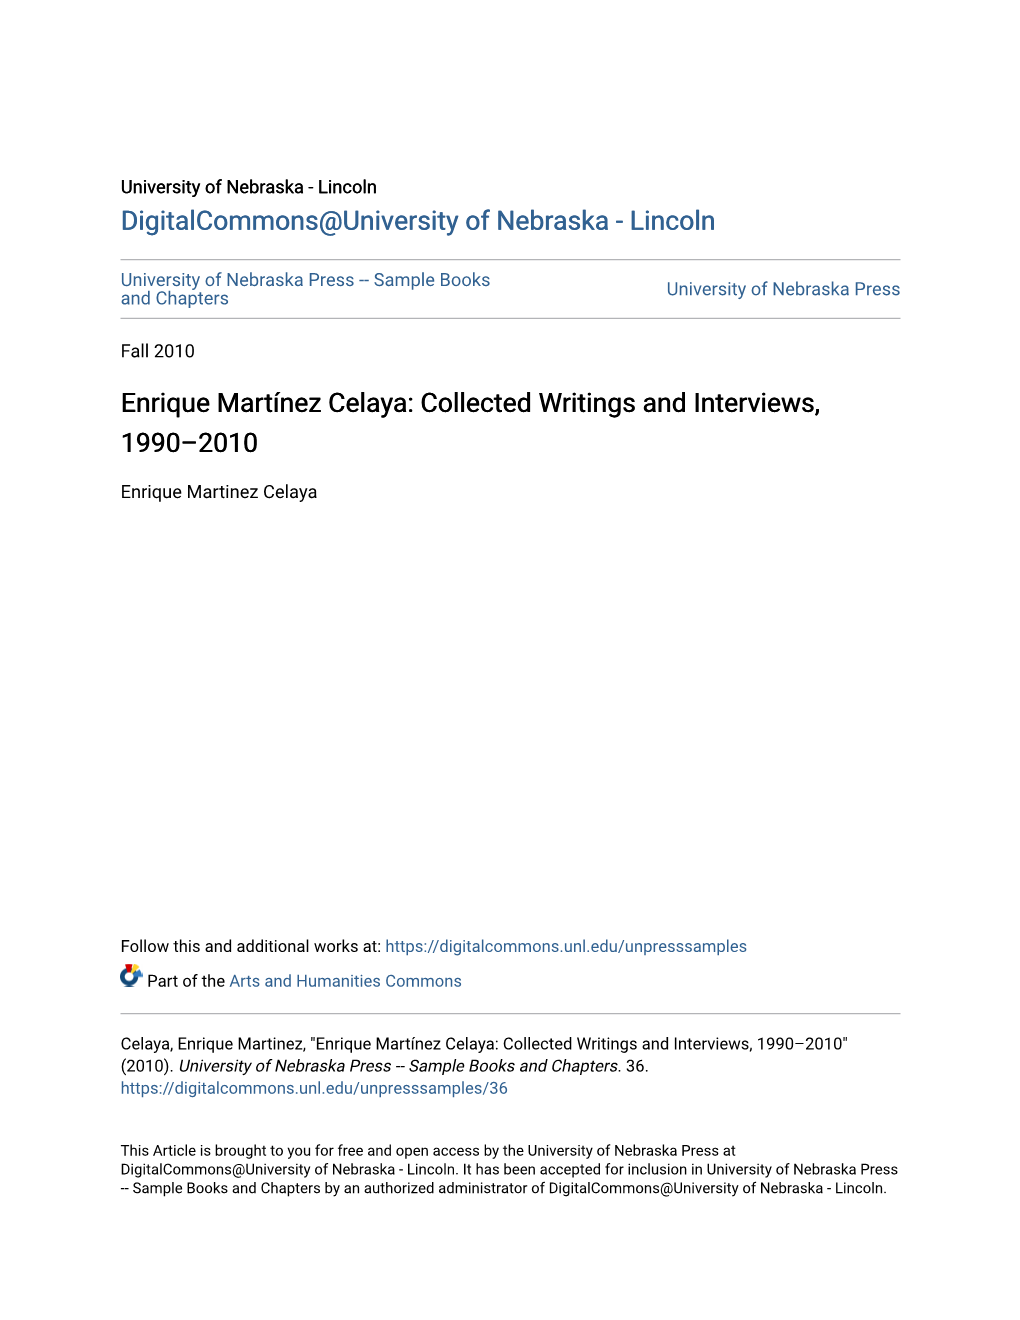 Enrique Martínez Celaya: Collected Writings and Interviews, 1990–2010